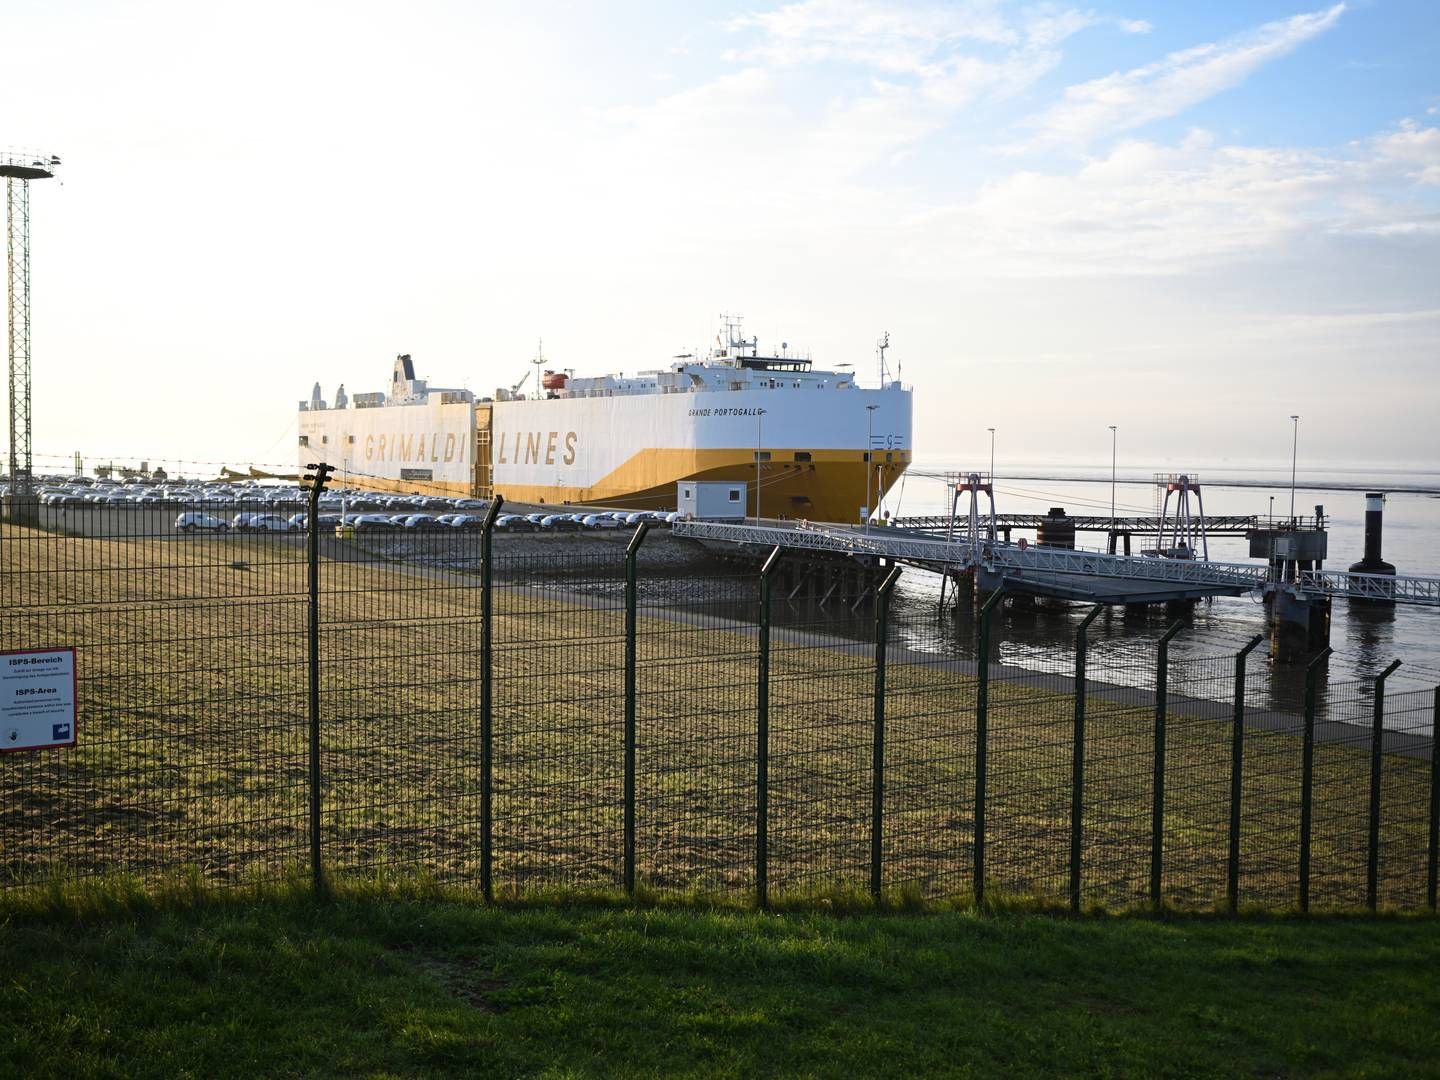 Car carrier in the Port of Emden, one of the ports in the German state of Lower Saxony, which fear that cost-cutting will slow down their development. | Foto: Lars Penning/AP/Ritzau Scanpix